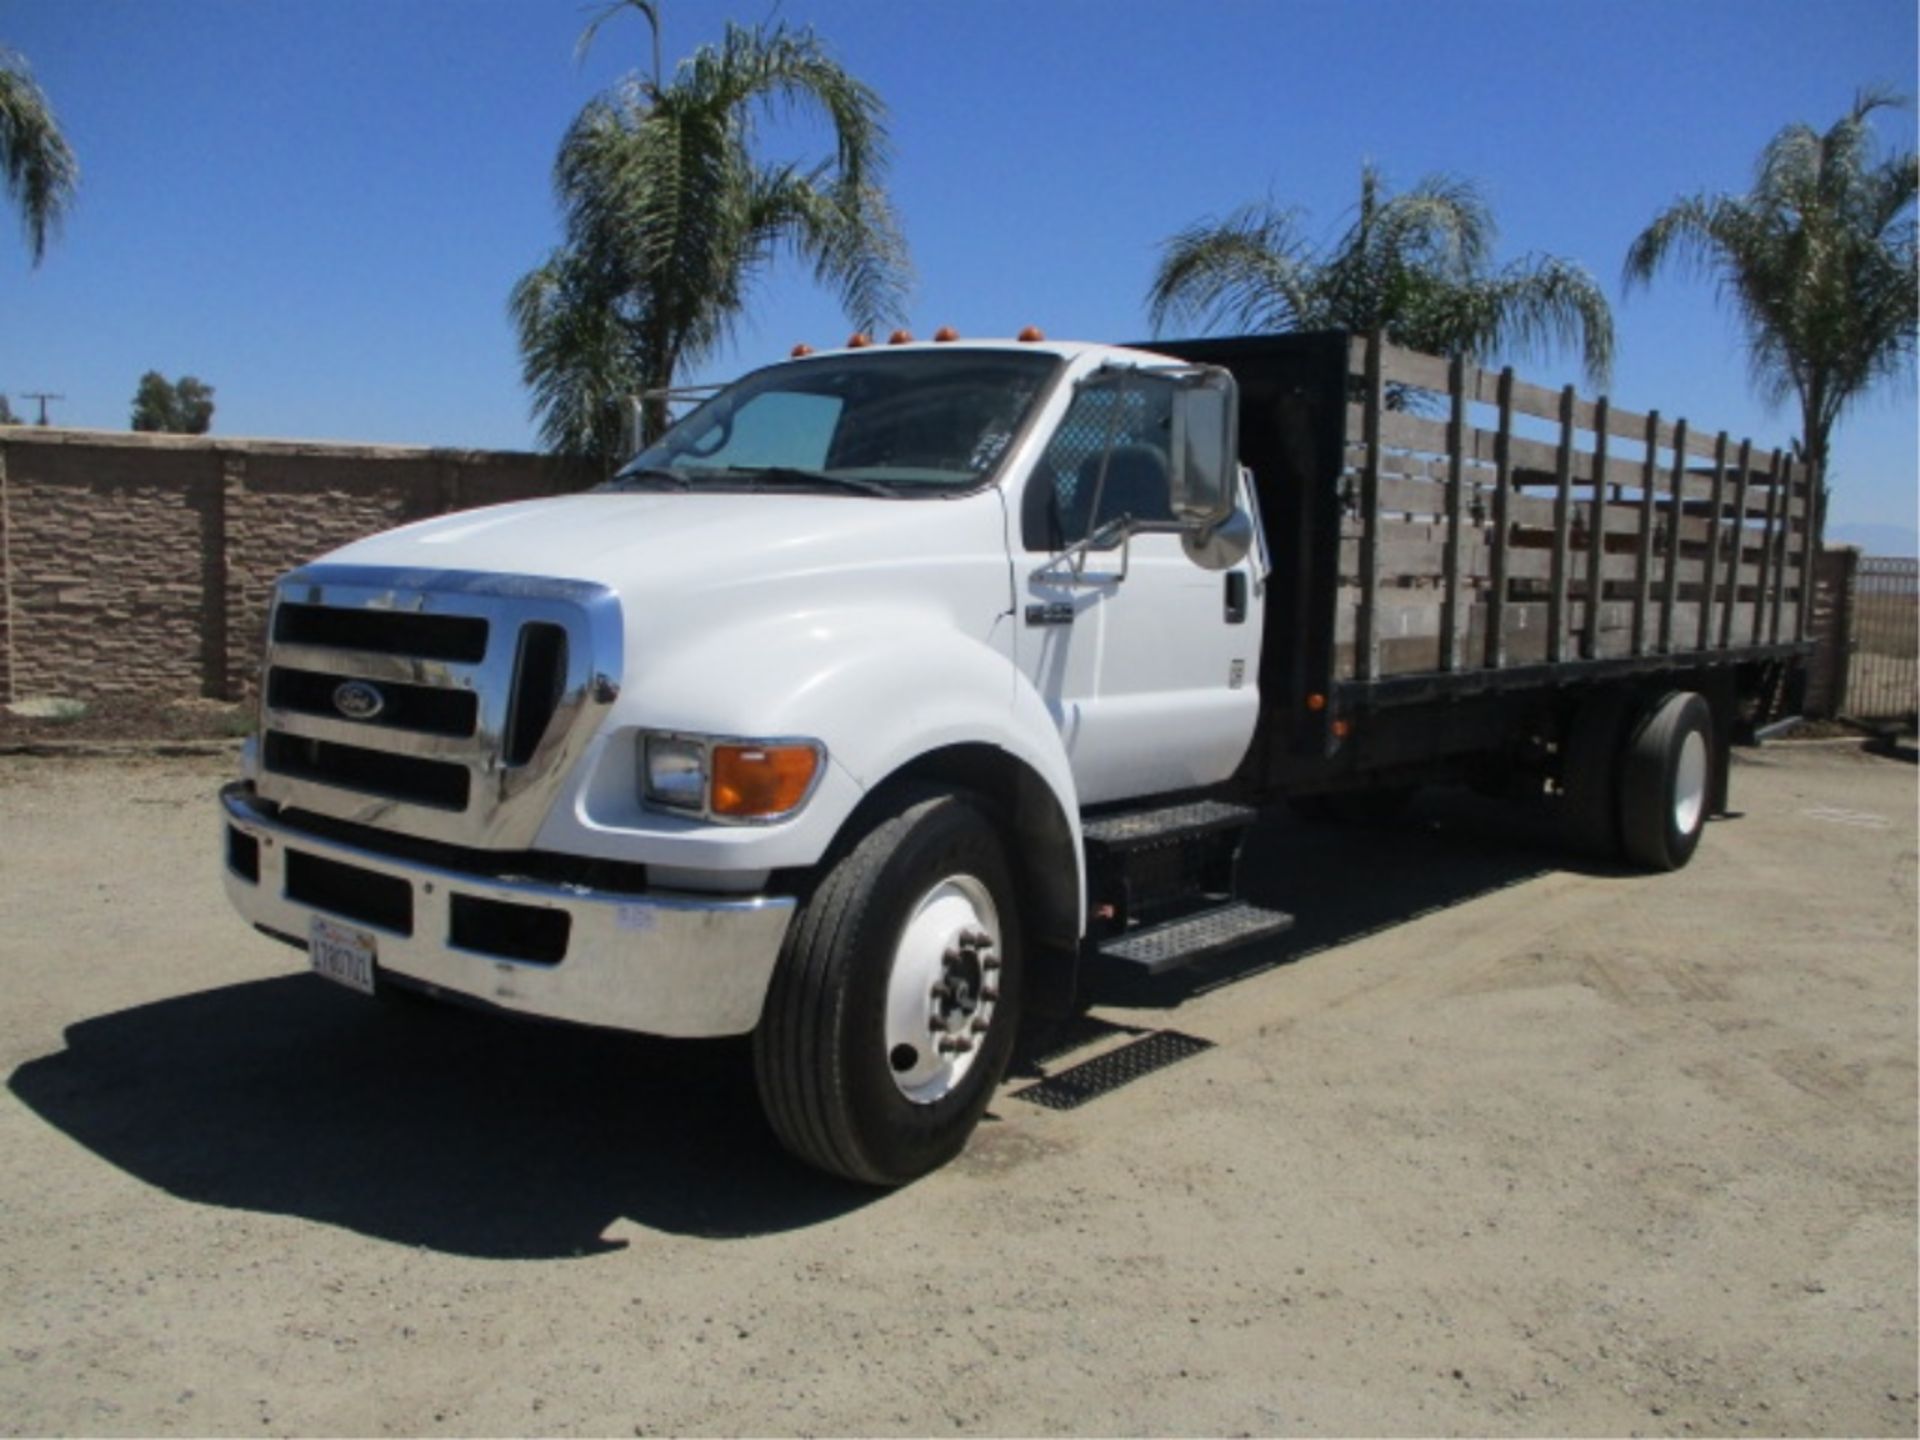 2005 Ford F650 S/A Flatbed Stakebed Truck, Cat C7 Acert 7.2L 6-Cyl Diesel, Automatic, Lift Gate, 24' - Image 5 of 61